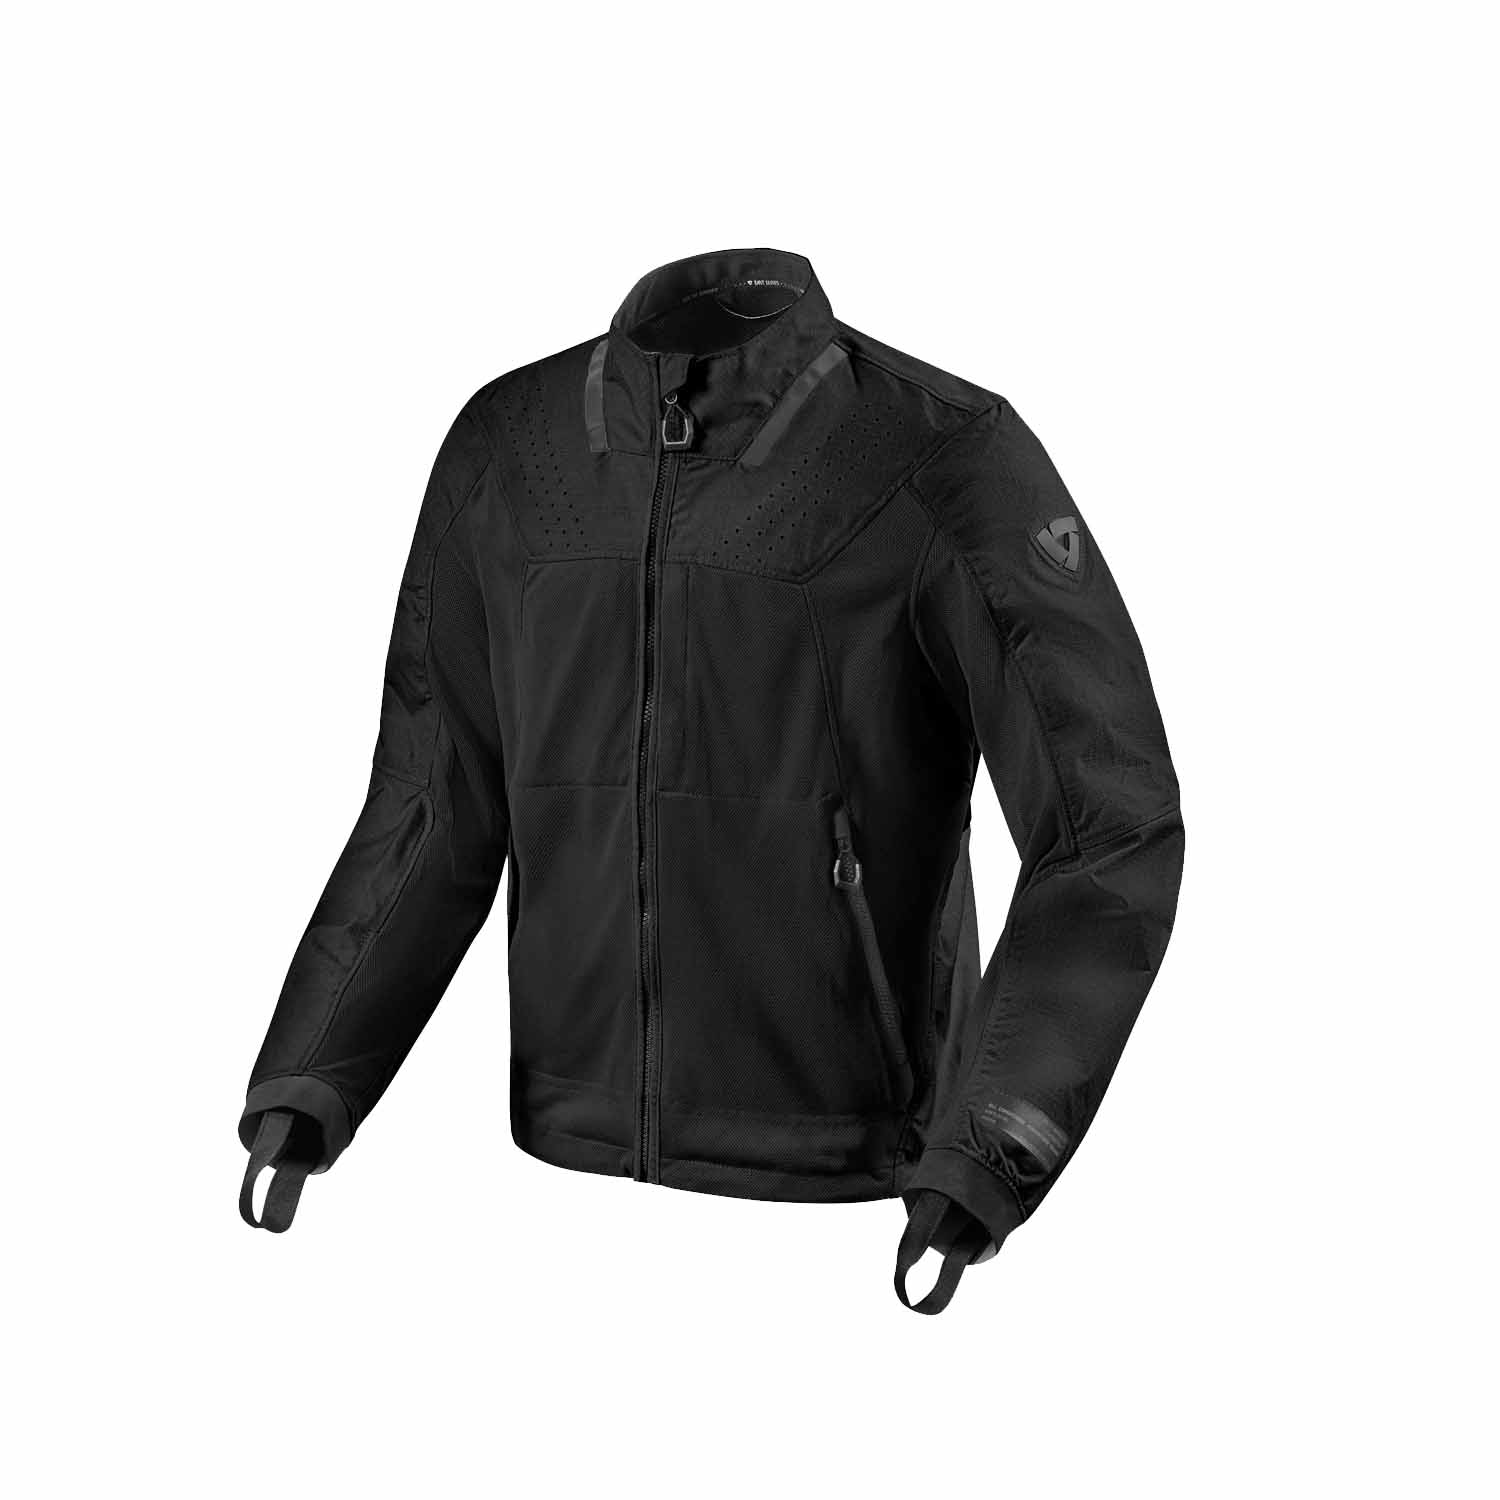 Image of REV'IT! Territory Jacket Black Standard Taille 2XL